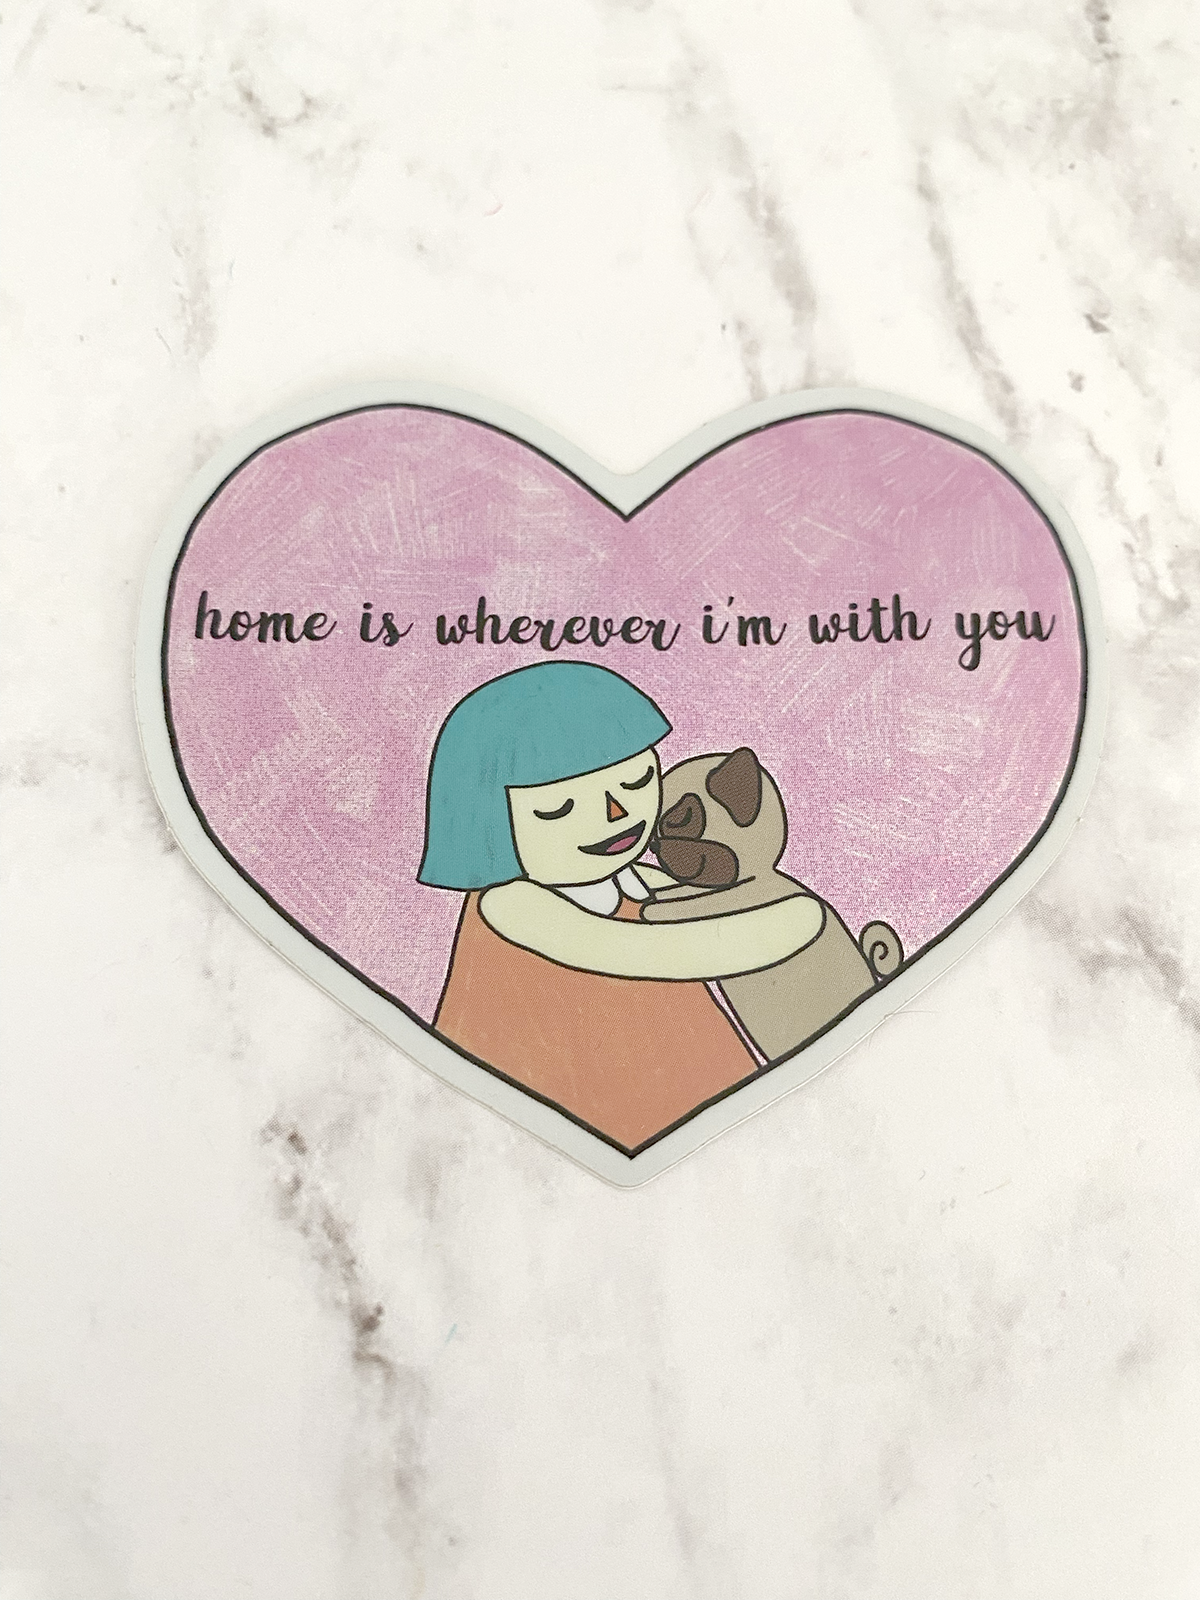 Home Is Wherever I'm With You - Holographic Pug Vinyl Sticker